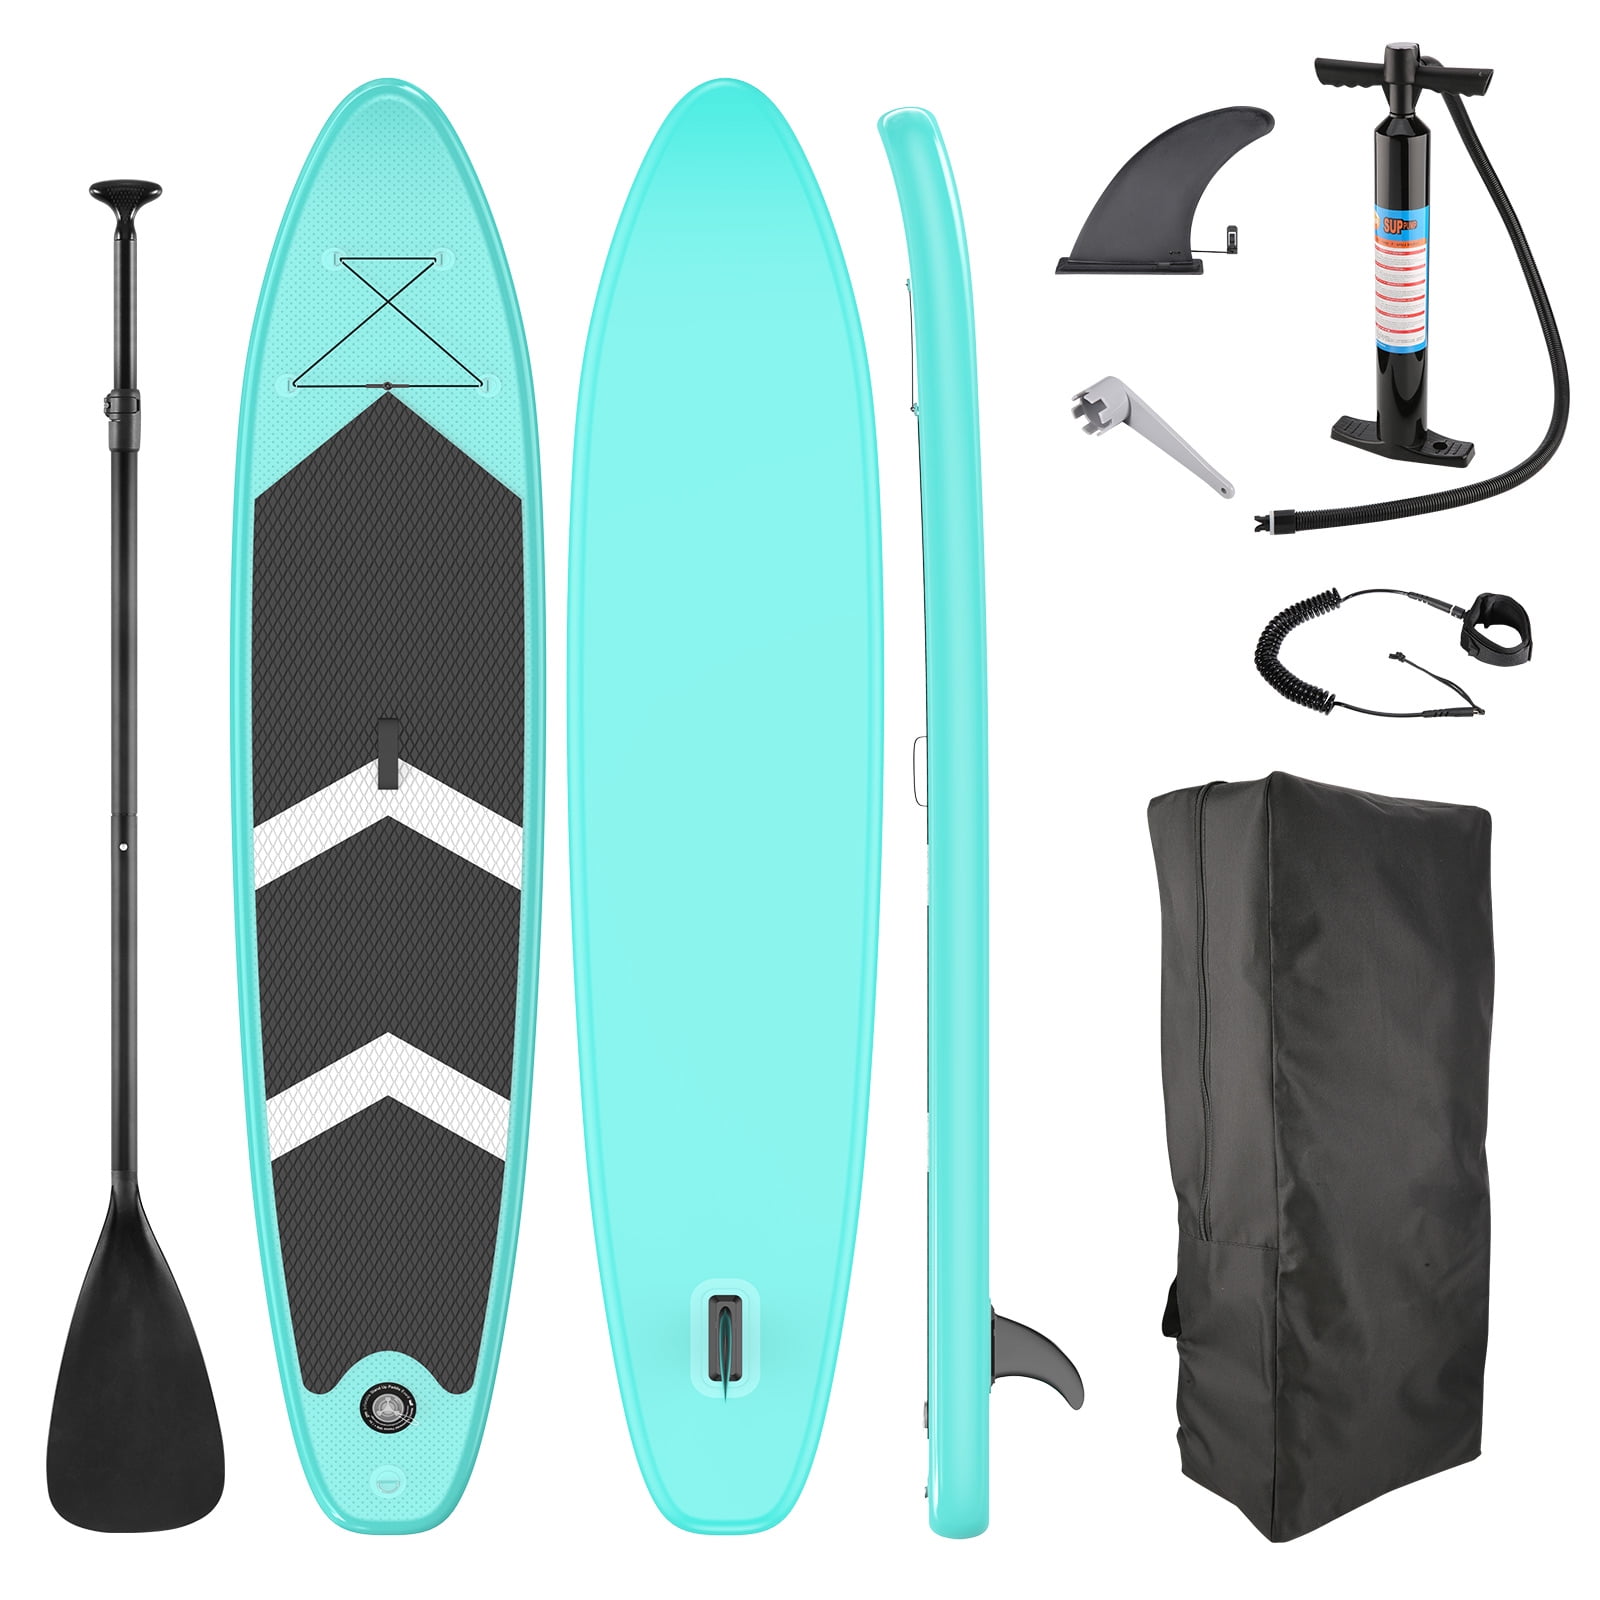 New 10'6" Stand Up Paddle Board Inflatable Surfboards SUP Boards Full Set 